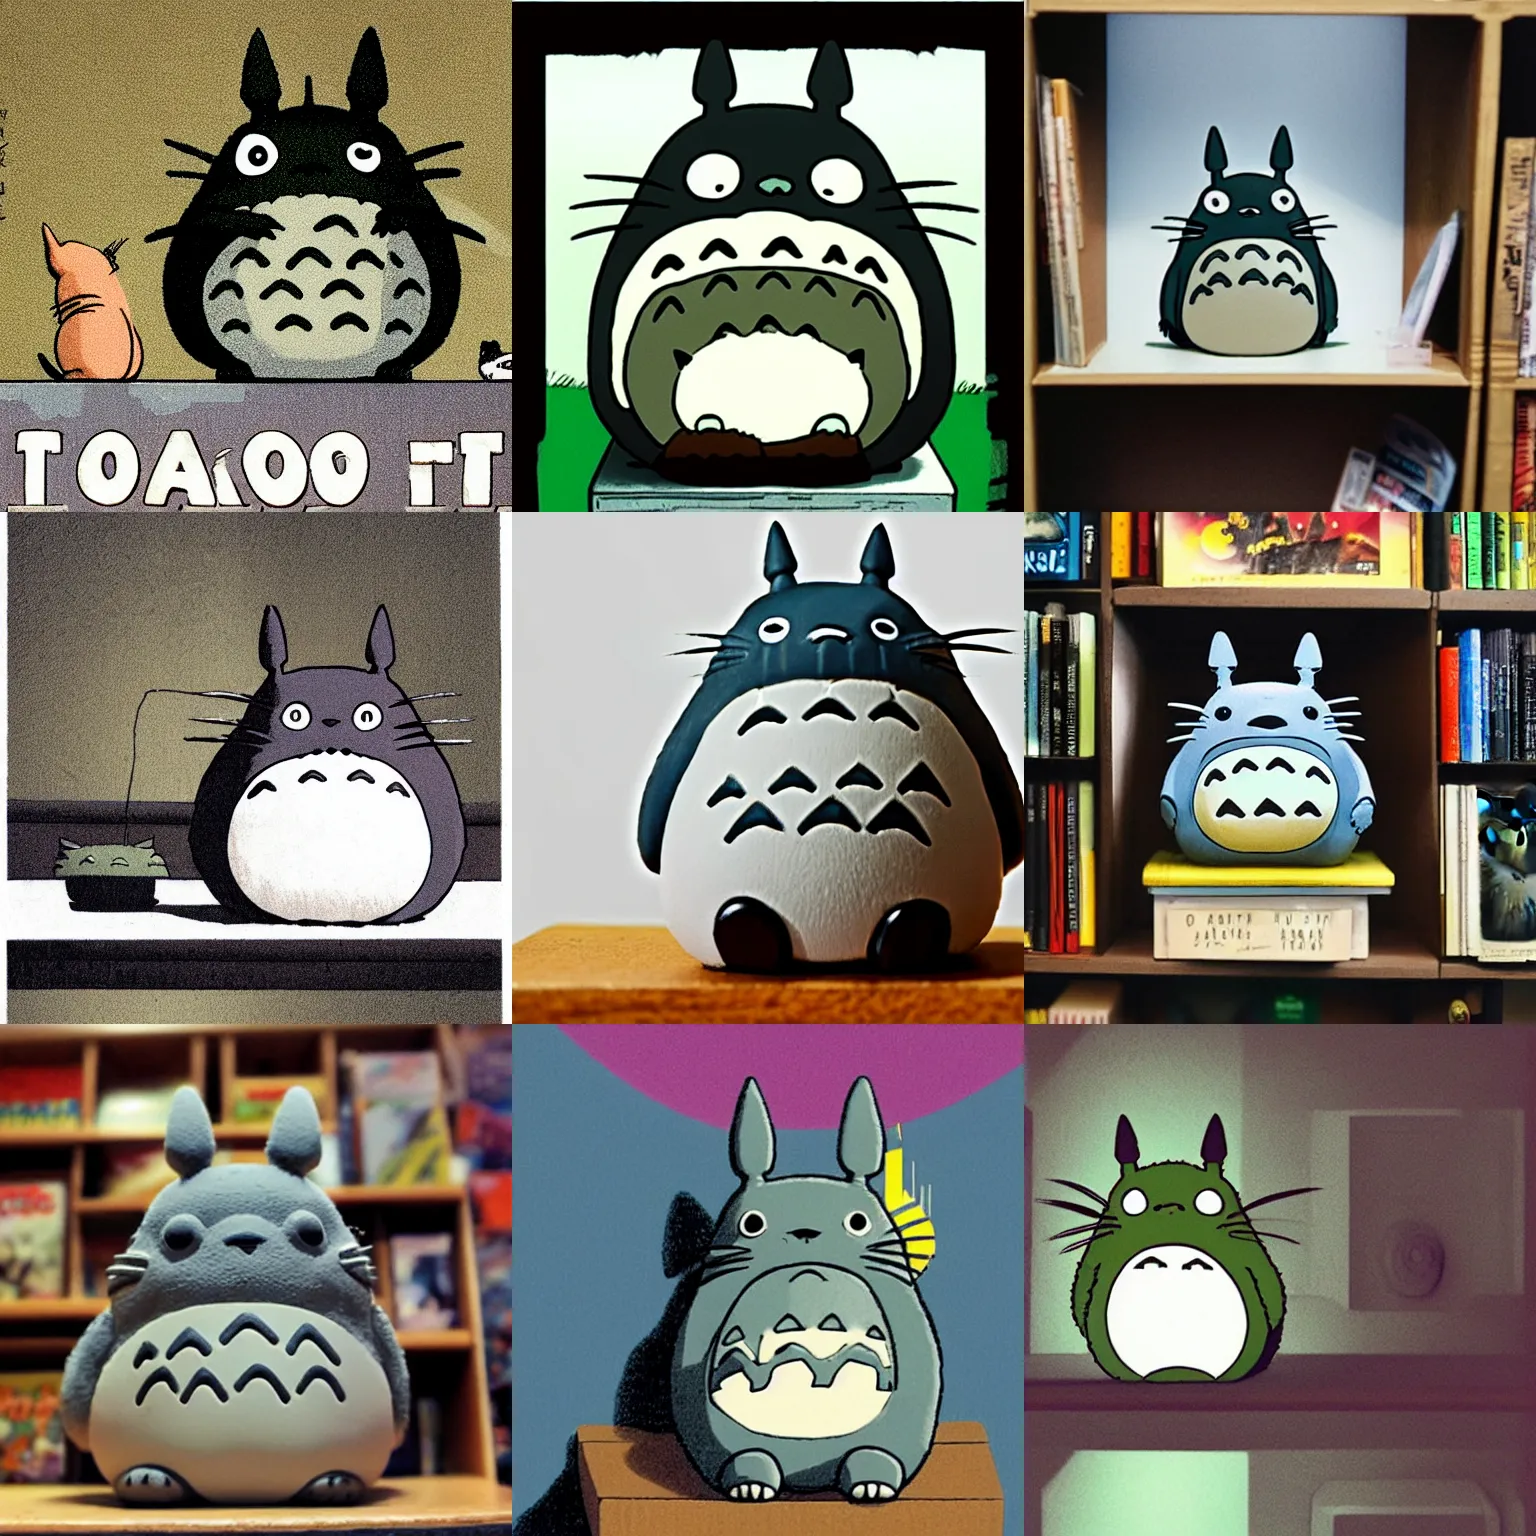 Prompt: totoro sitting on a shelf in a dark room. totoro is made from plastic that emits light. comic books on shelf